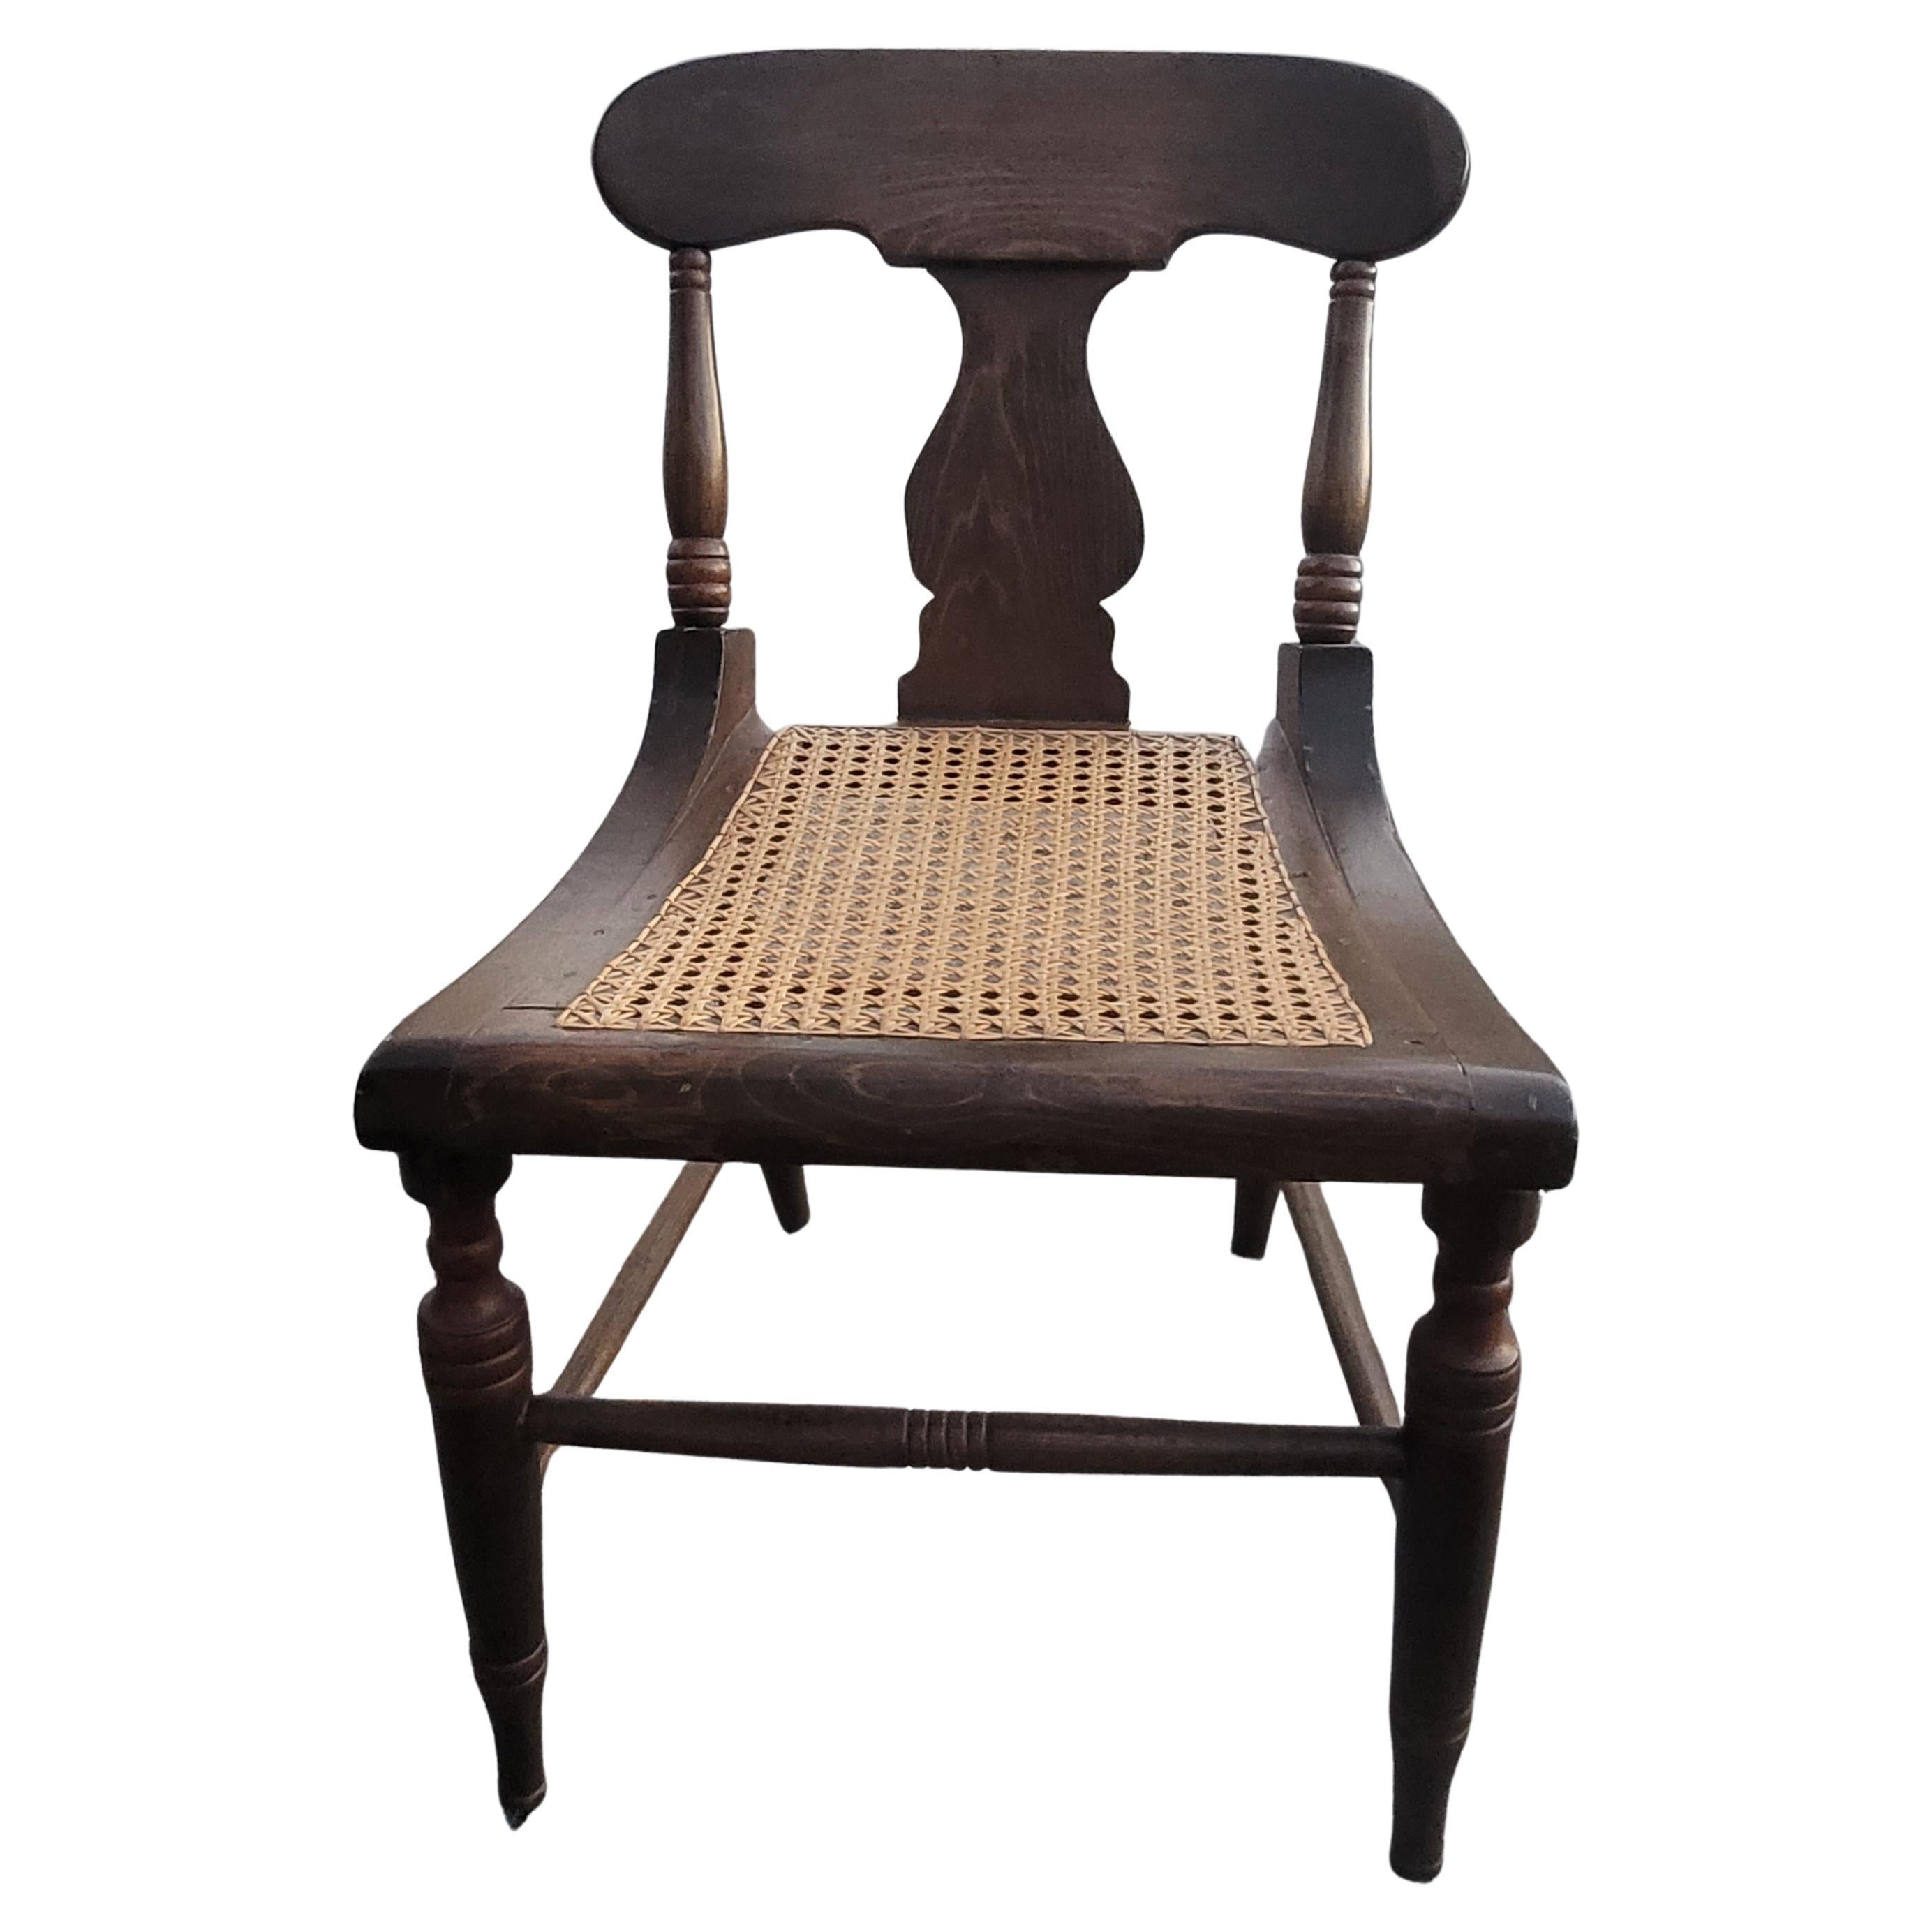 Early 20th Century American Victorian Cane Seat Low Side Chair For Sale